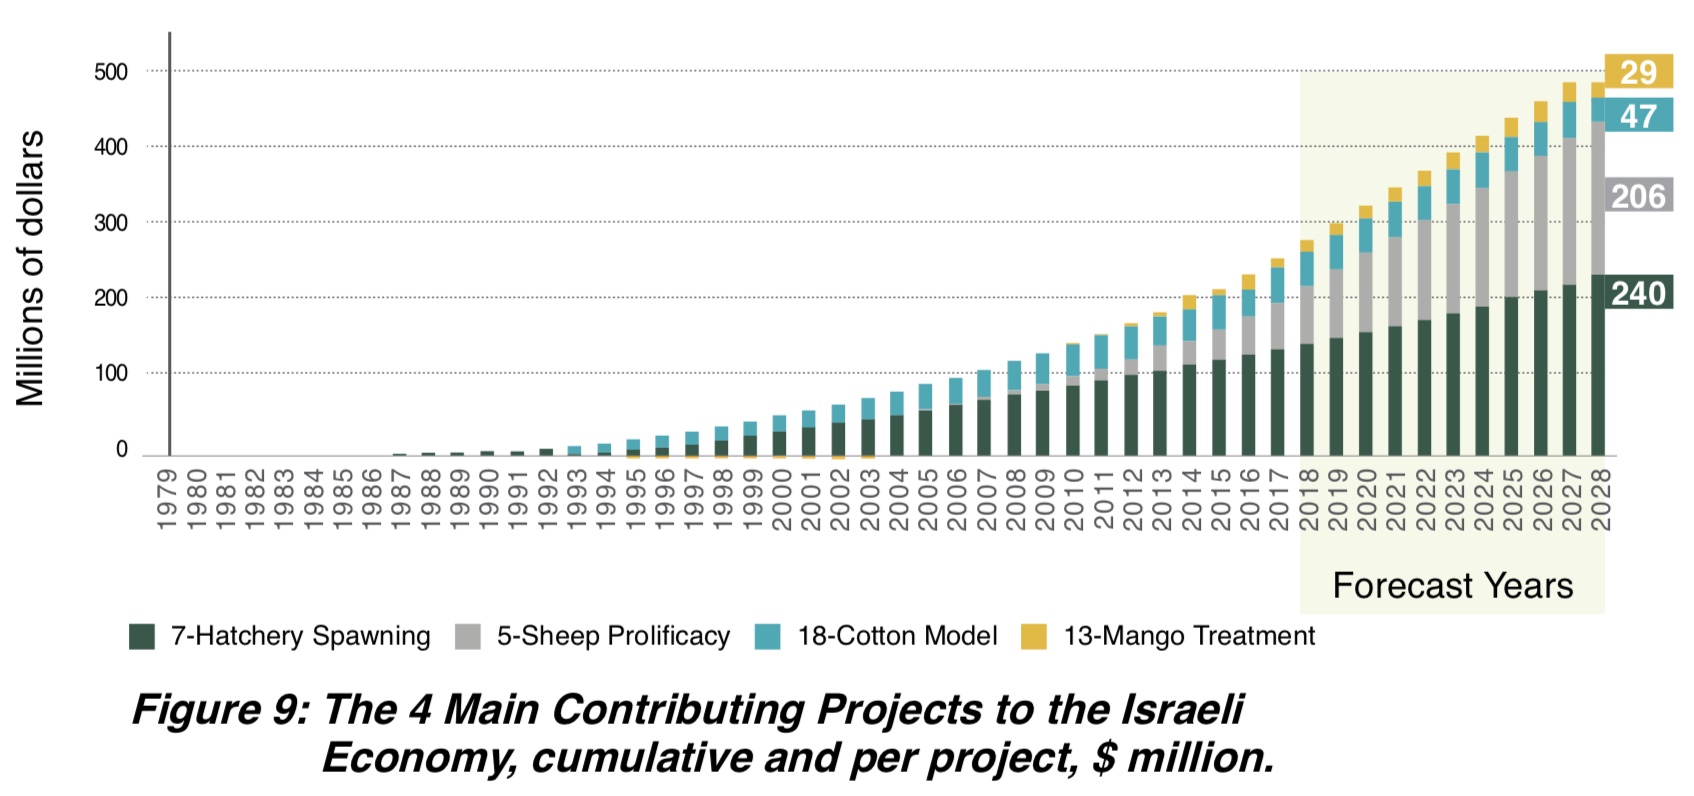 Figure 9: The 4 Main Contributing Projects to the Israeli Economy, accumulated $ million